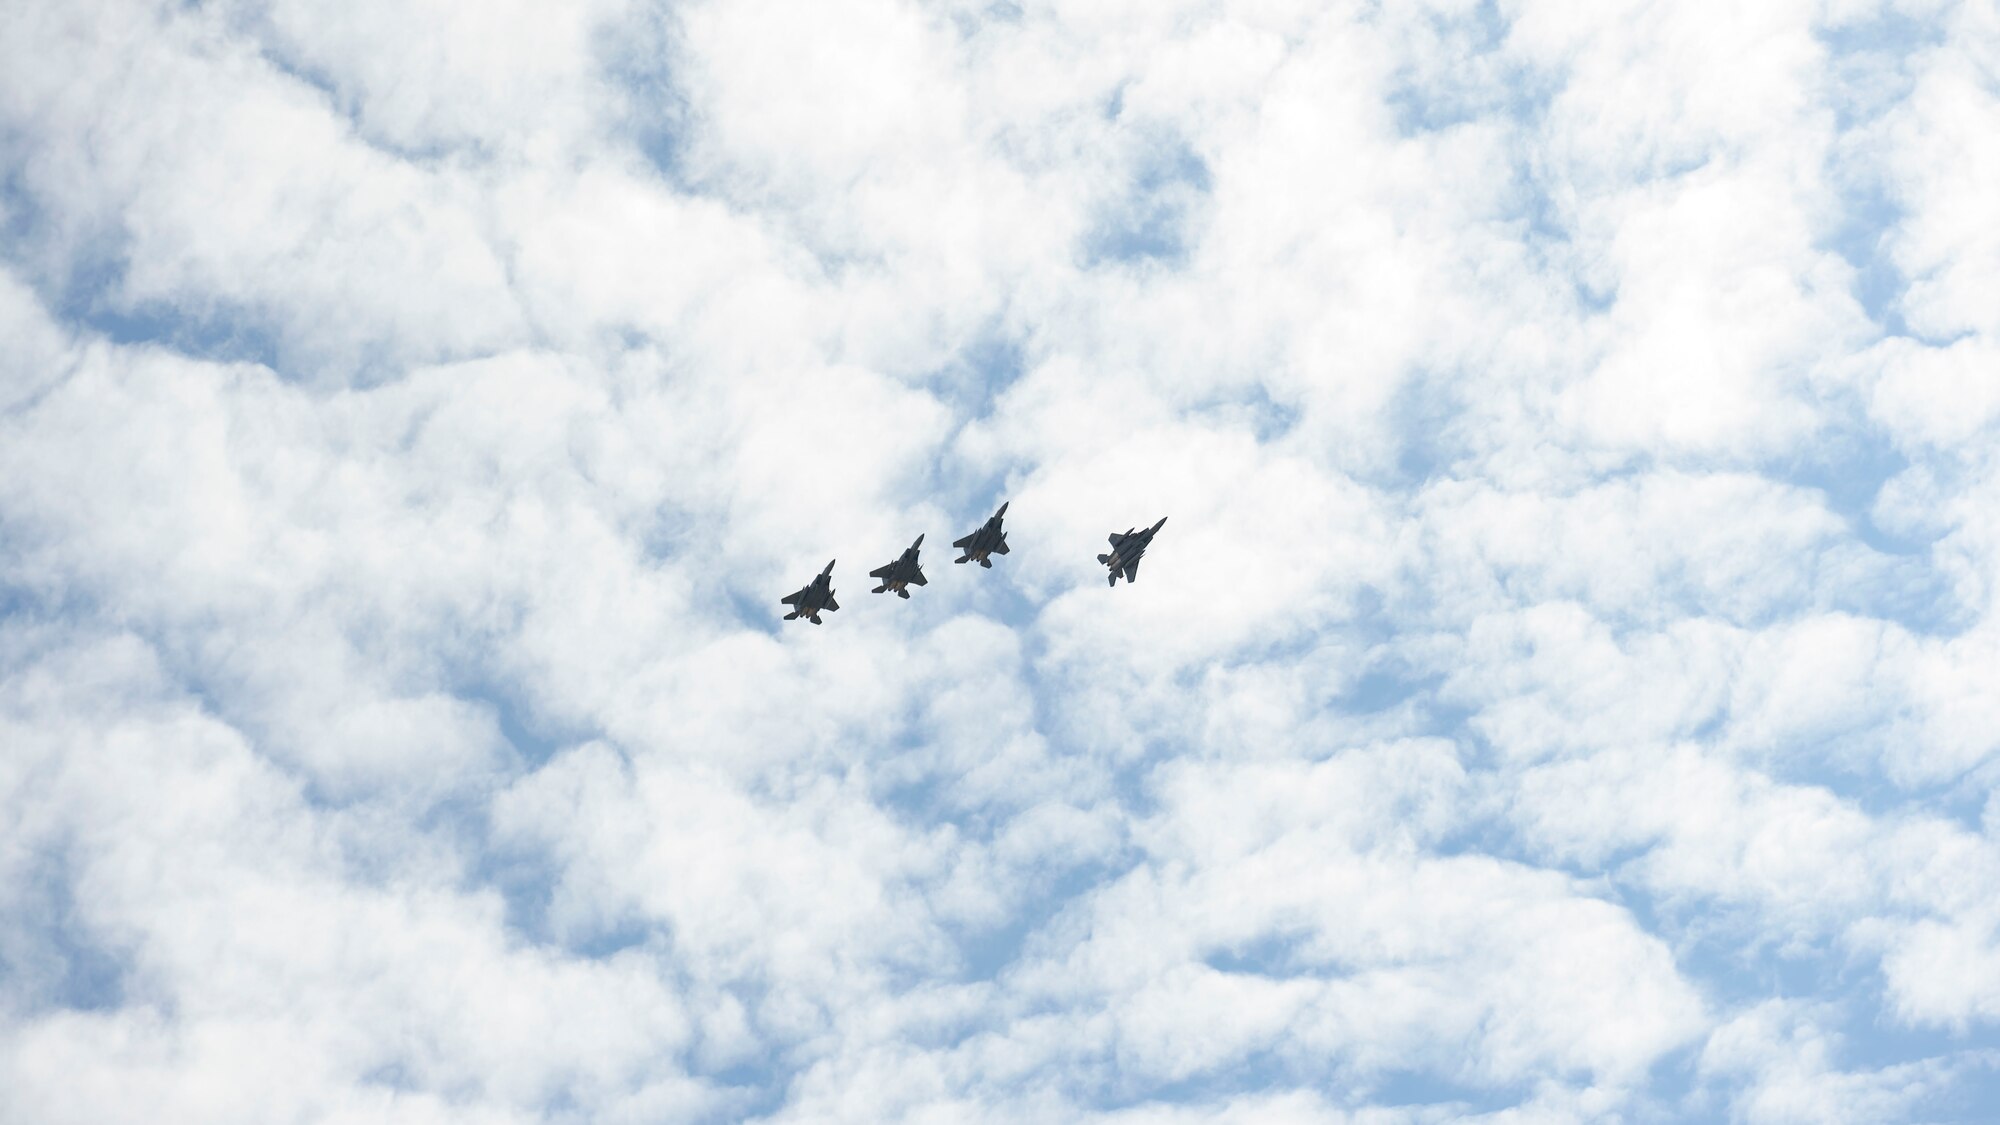 F-15E Strike Eagles from Mountain Home Air Force Base fly over the base during a training sortie, March 19, 2020. The F-15E is the primary airframe at MHAFB and is assigned to the 391st and 389th Fighter Squadrons. (U.S. Air Force photo by Senior Airman Tyrell Hall)